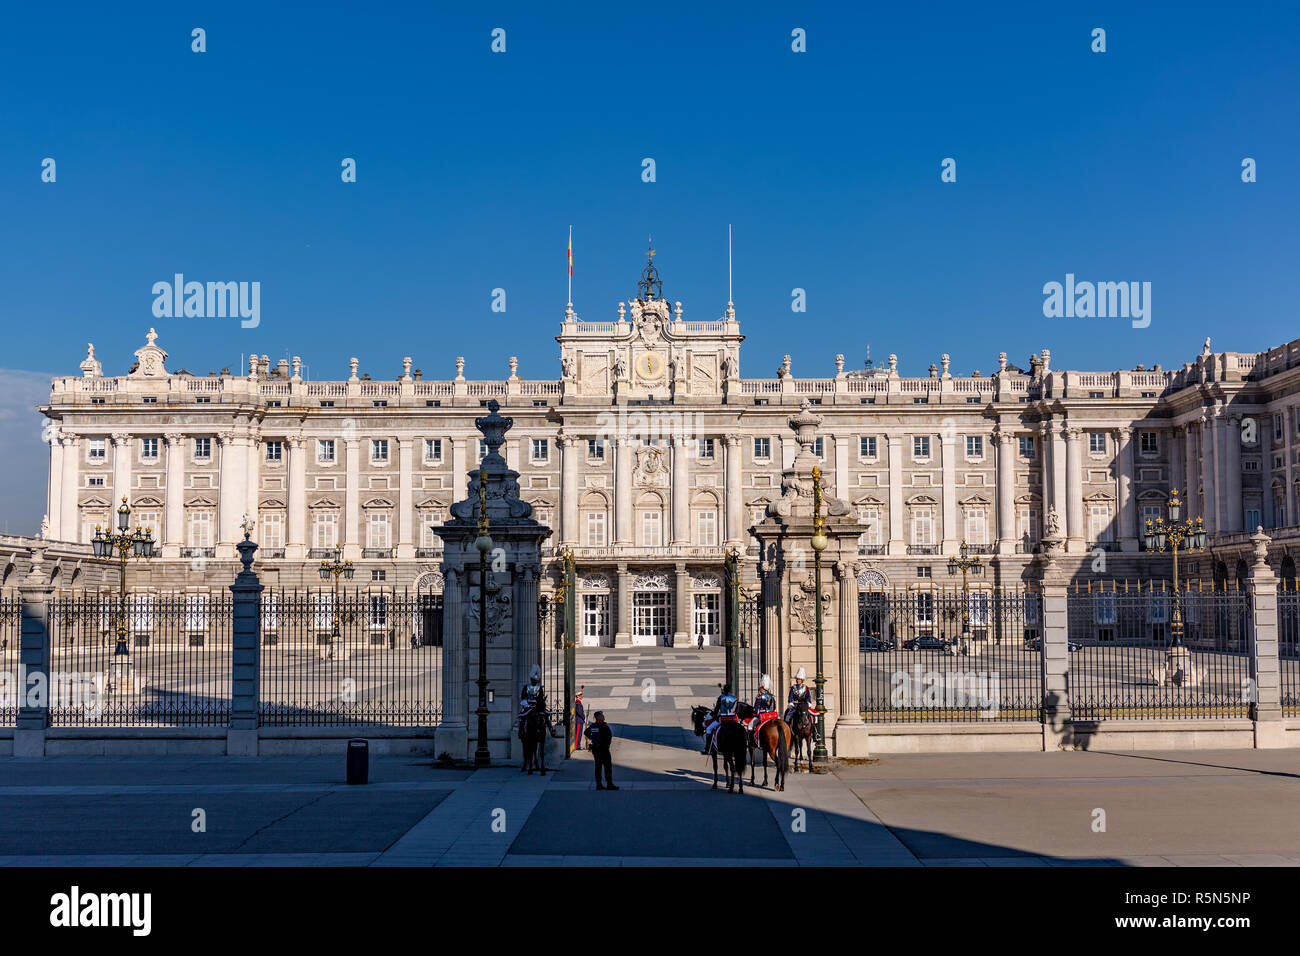 Madrid, Spain - November 29, 2018: The Royal Palace in Madrid at a cold sunny autuum day, with guards on horseback. Stock Photo